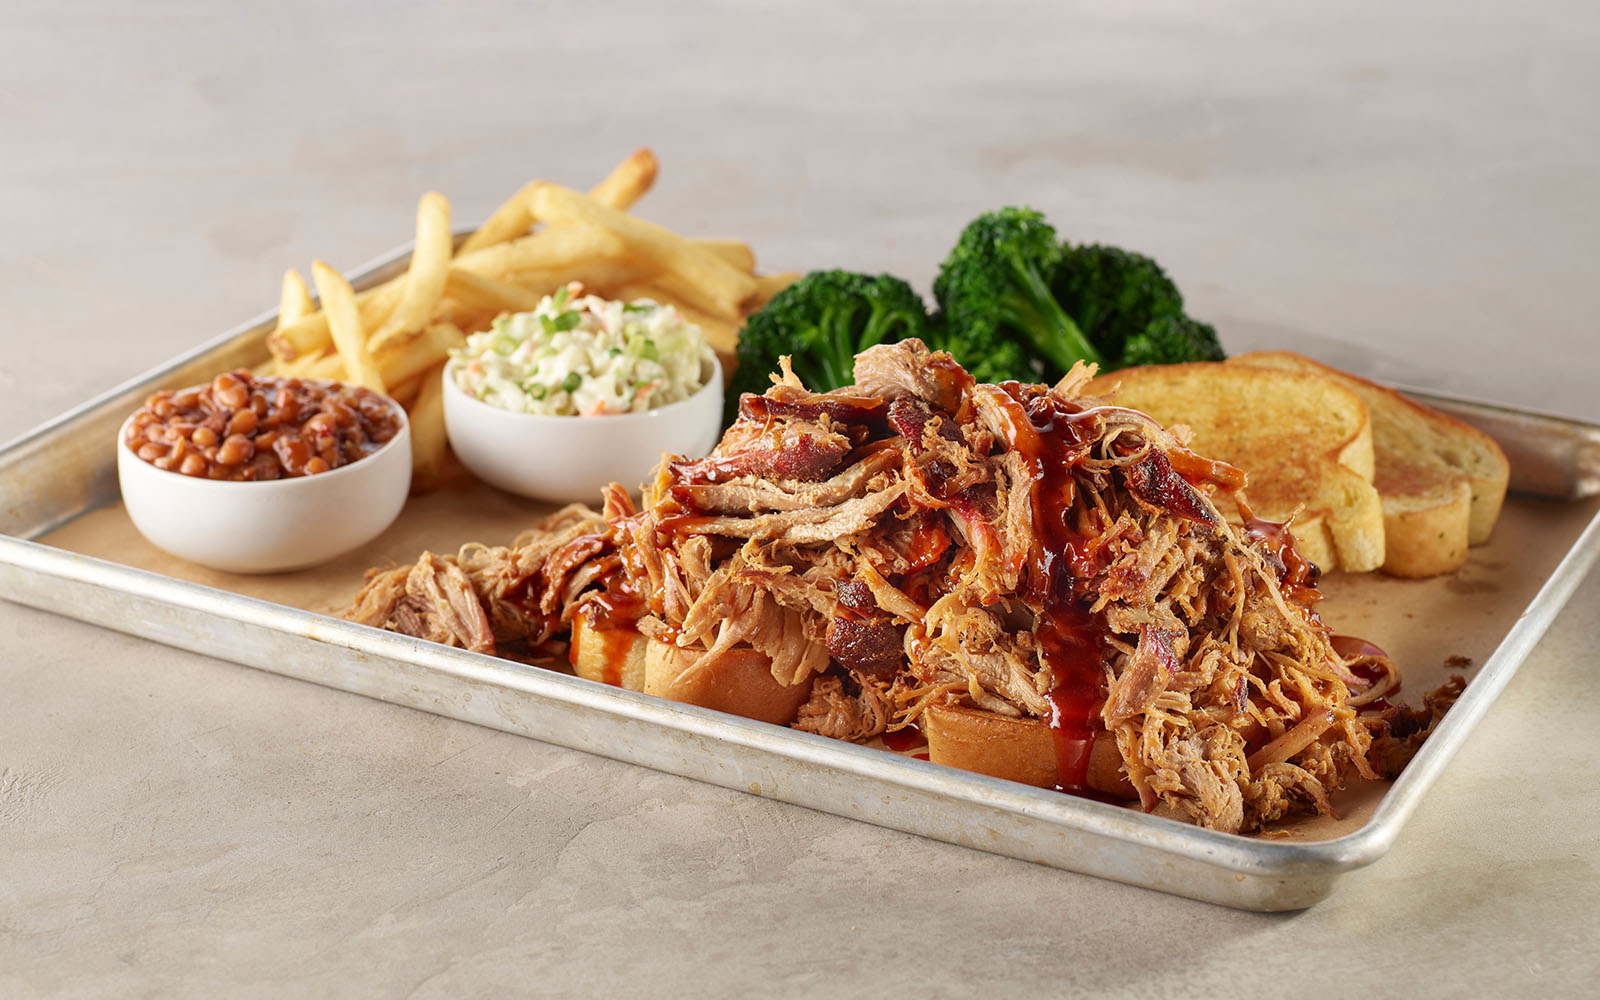 Pulled pork with sides